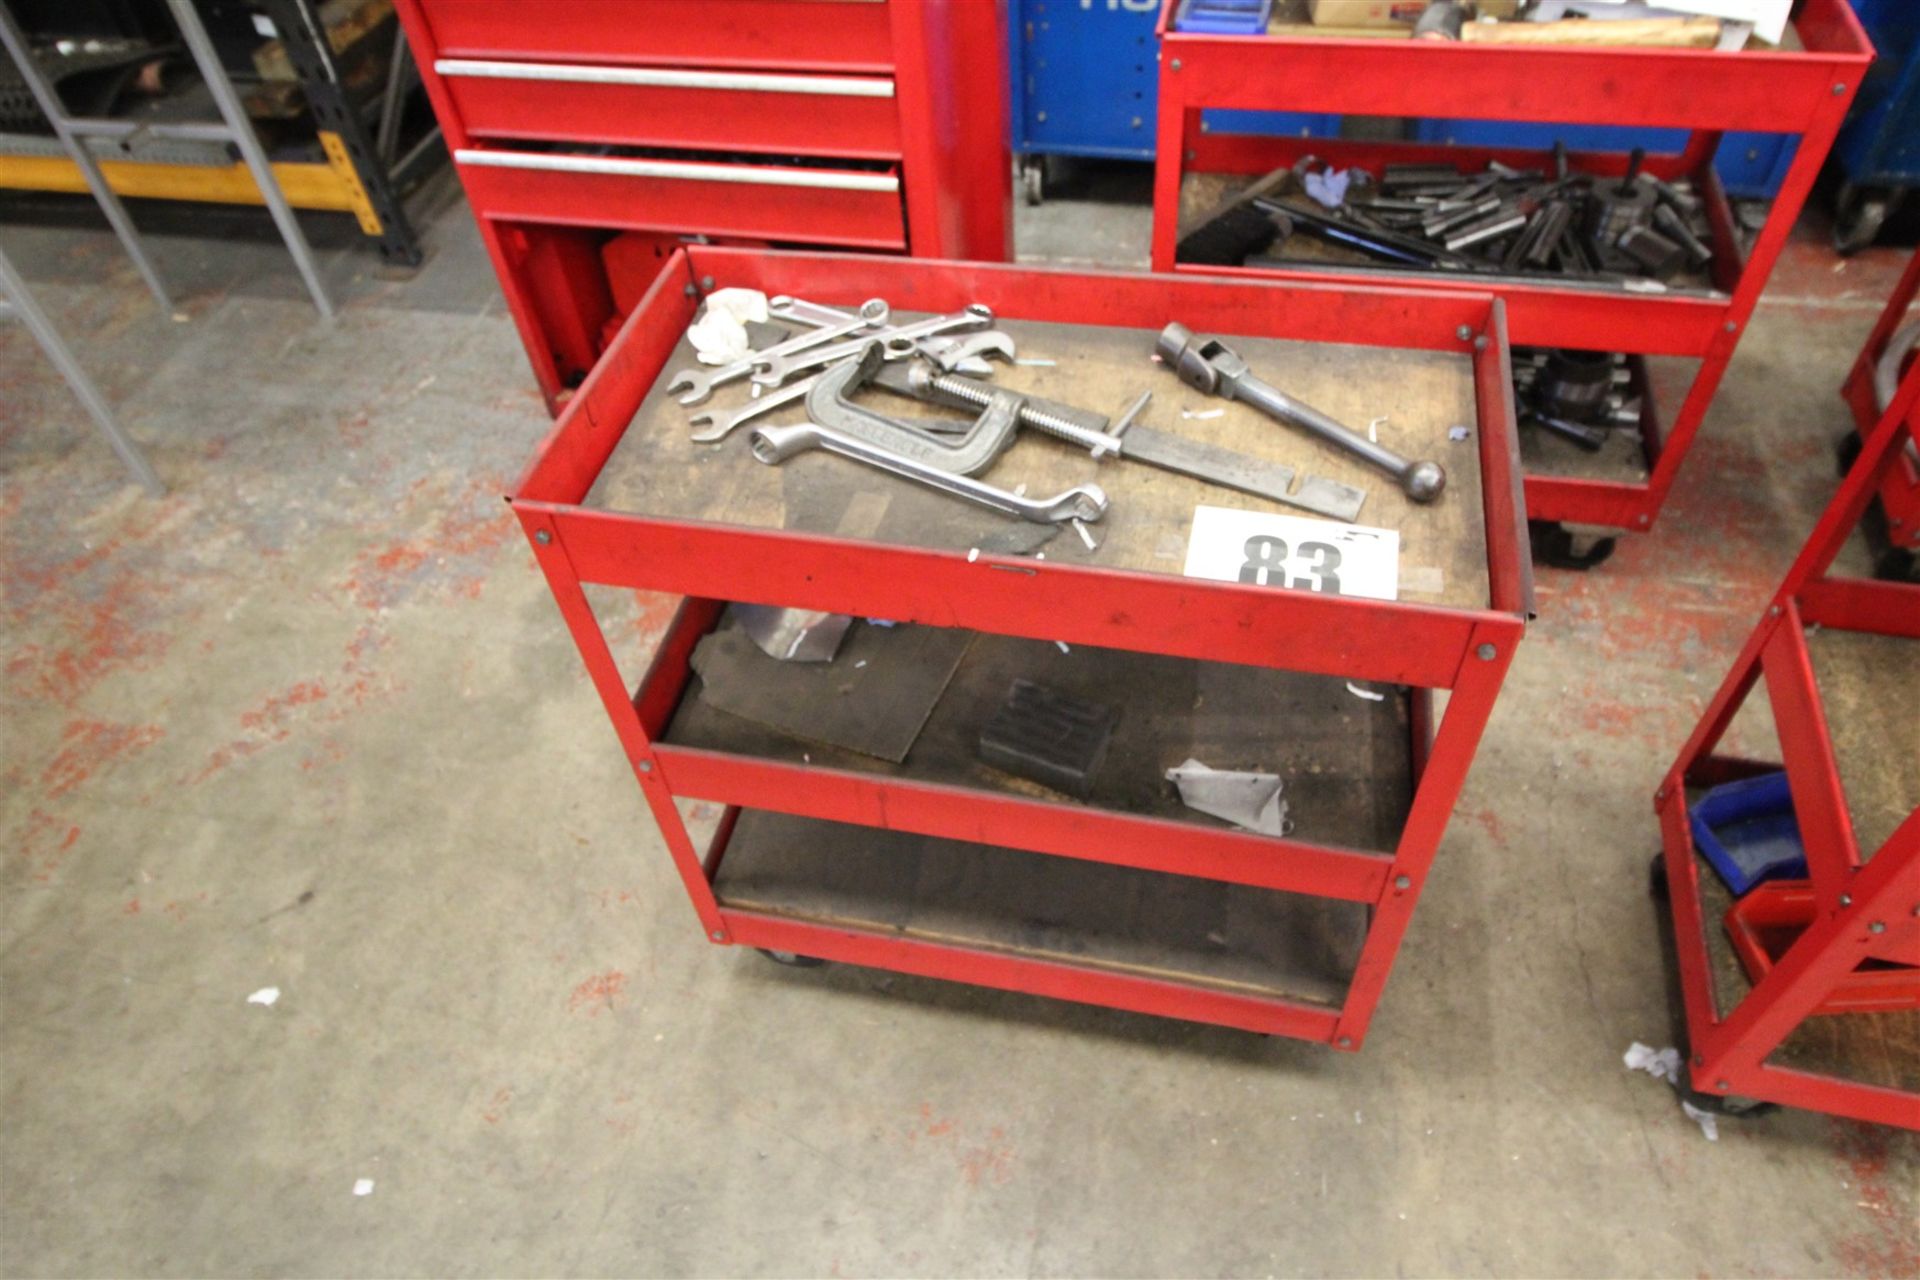 28", Red, 3-Height Tool Trolley, with Contents of Miscellaneous Spanners.